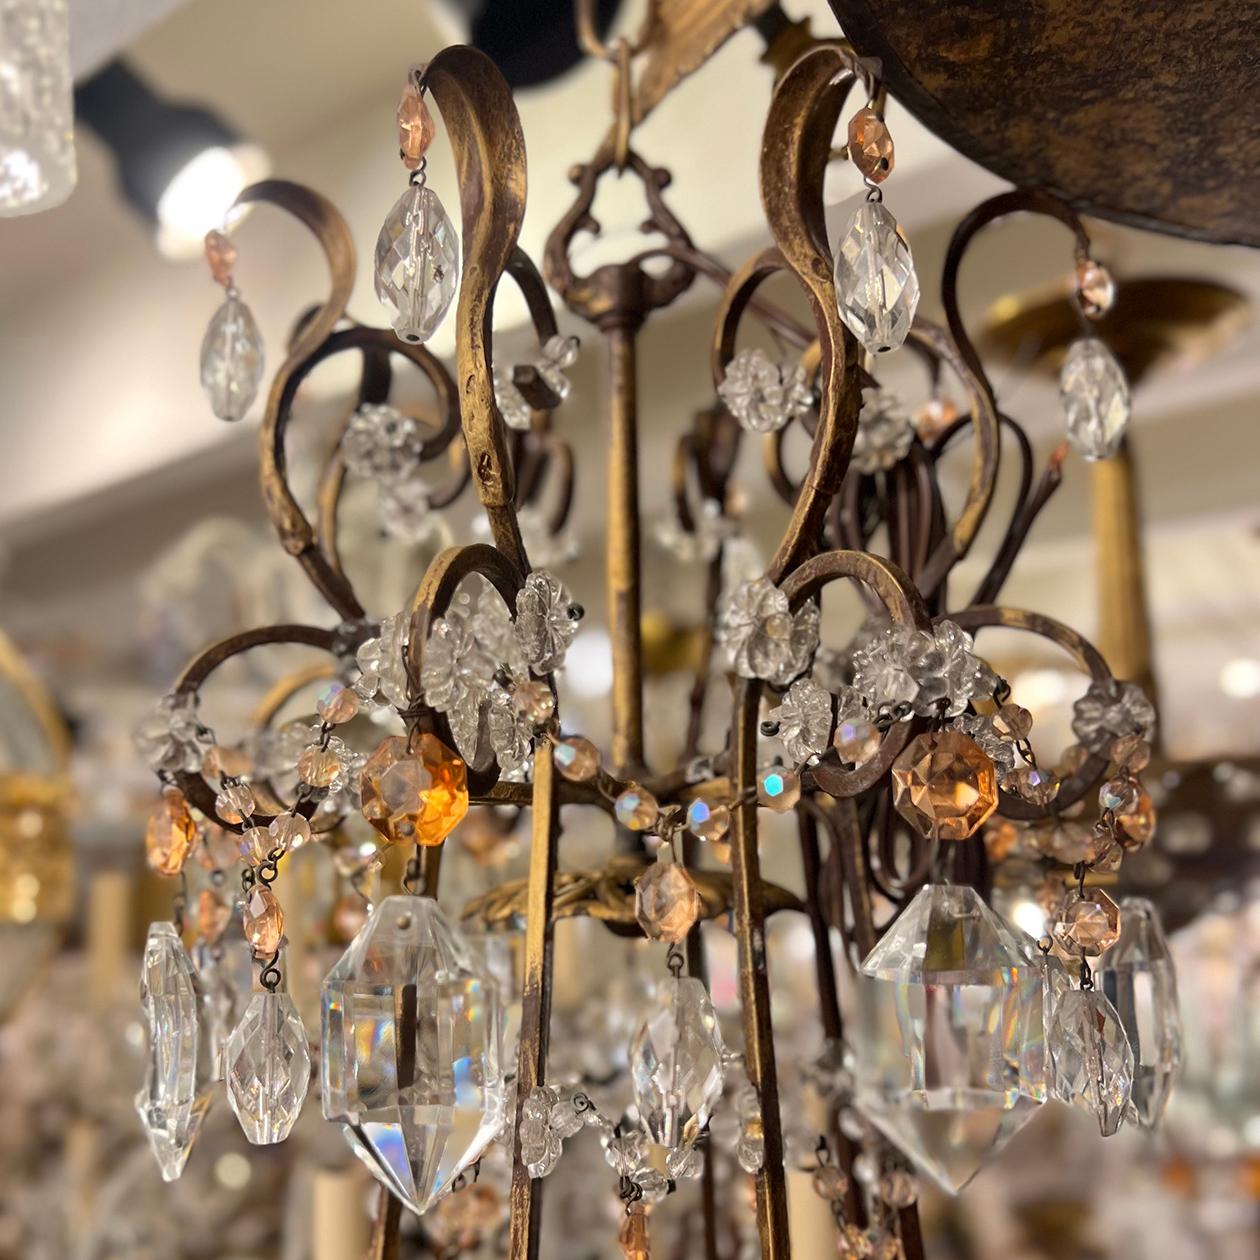 A circa 1920s French gilt metal chandelier with crystal beads and glass pendants with 8 candelabra lights.

Measurements:
Height: 33